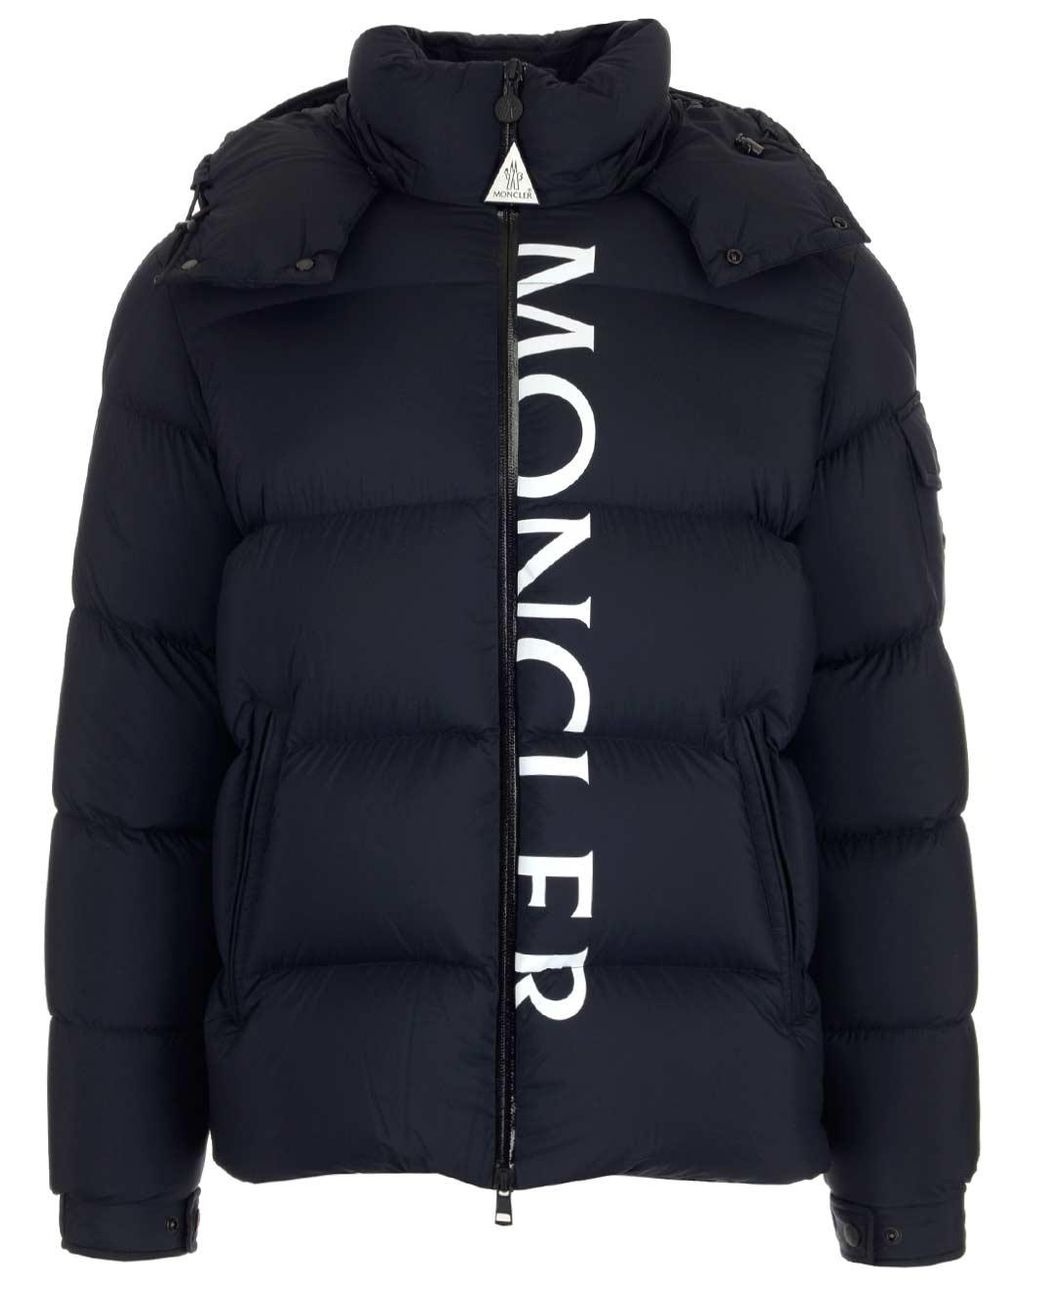 Moncler Synthetic Maures Hooded Down Jacket in Navy (Blue) for Men - Lyst